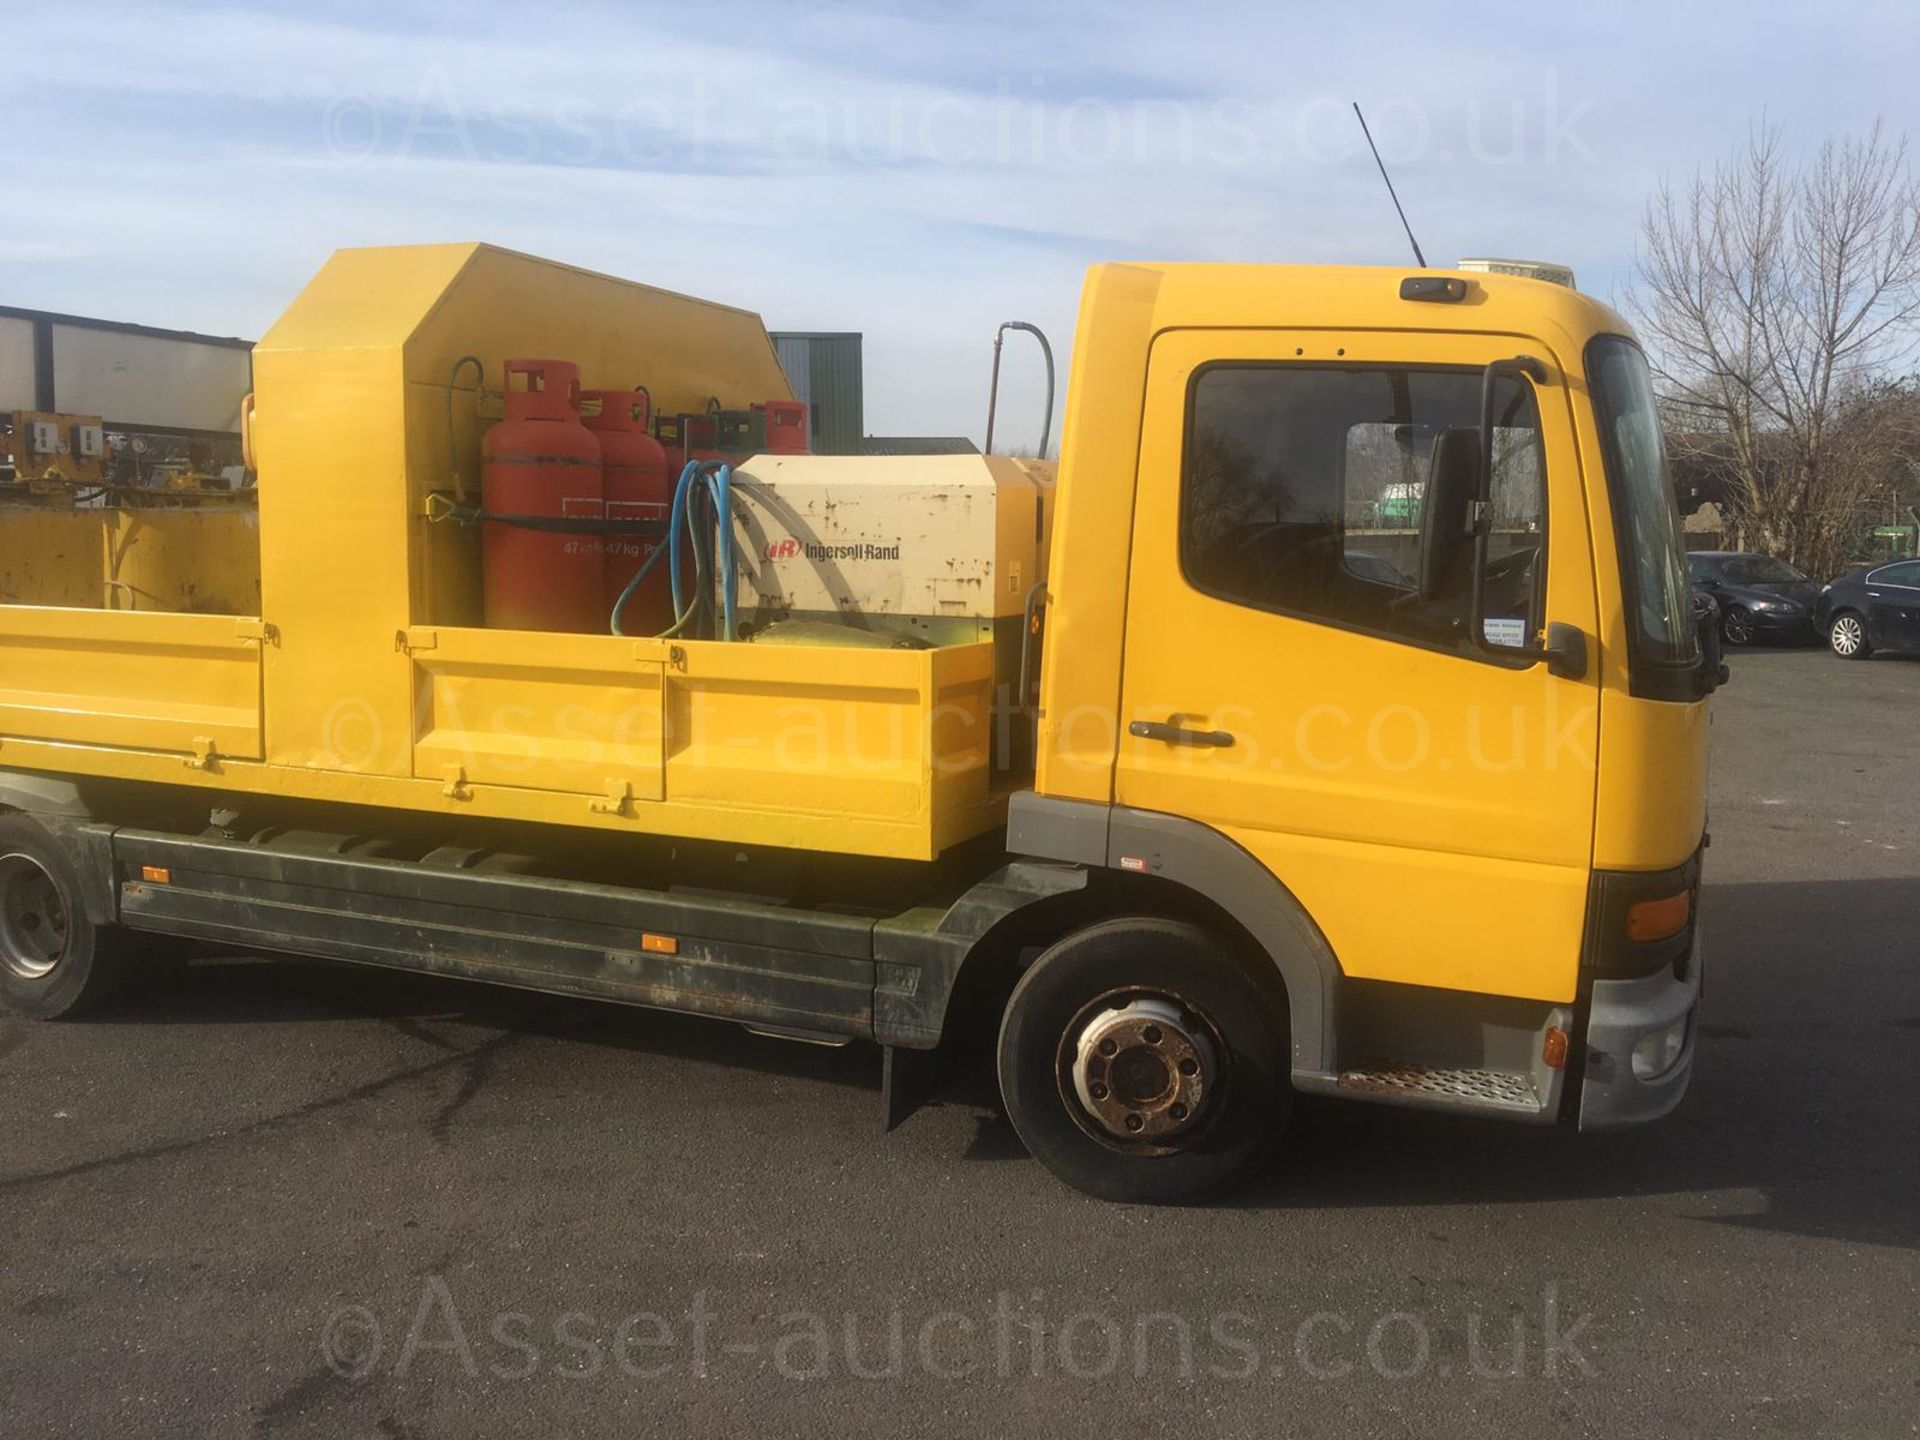 2004/54 REG MERCEDES ATEGO 1018 DAY YELLOW DROPSIDE LINE PAINTING LORRY 4.3L DIESEL ENGINE *NO VAT* - Image 6 of 128